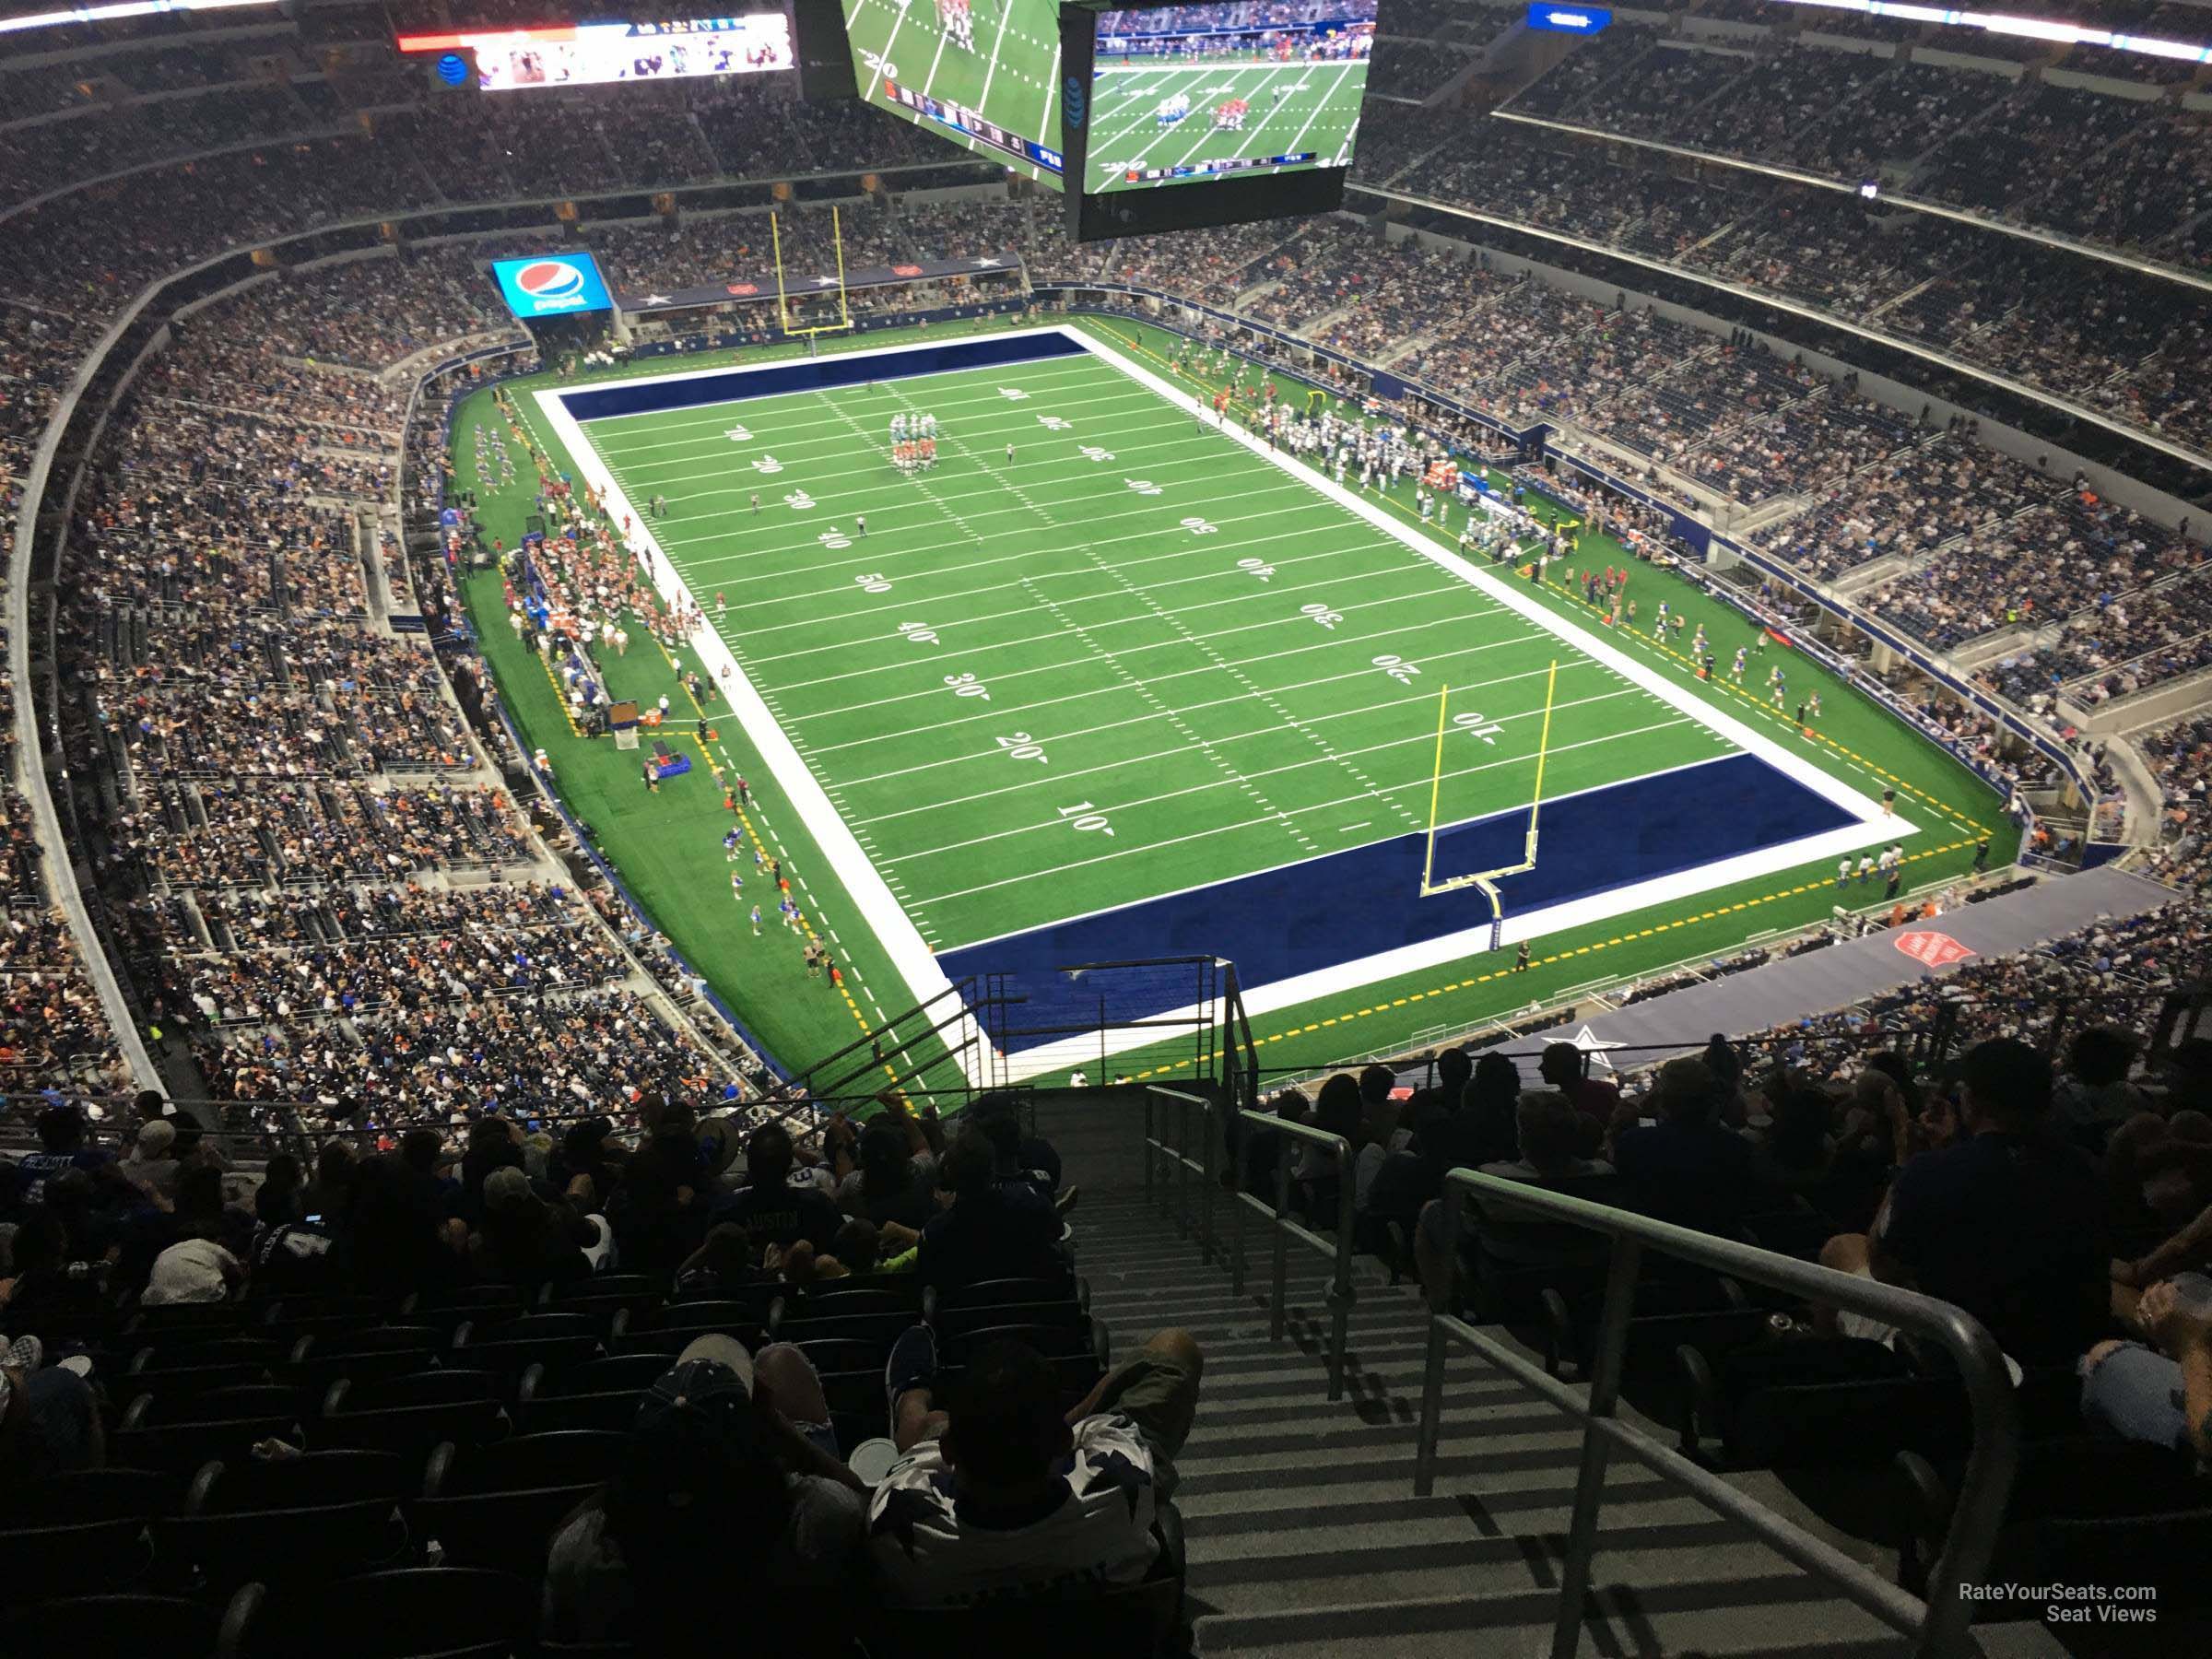 section 430, row 22 seat view  for football - at&t stadium (cowboys stadium)